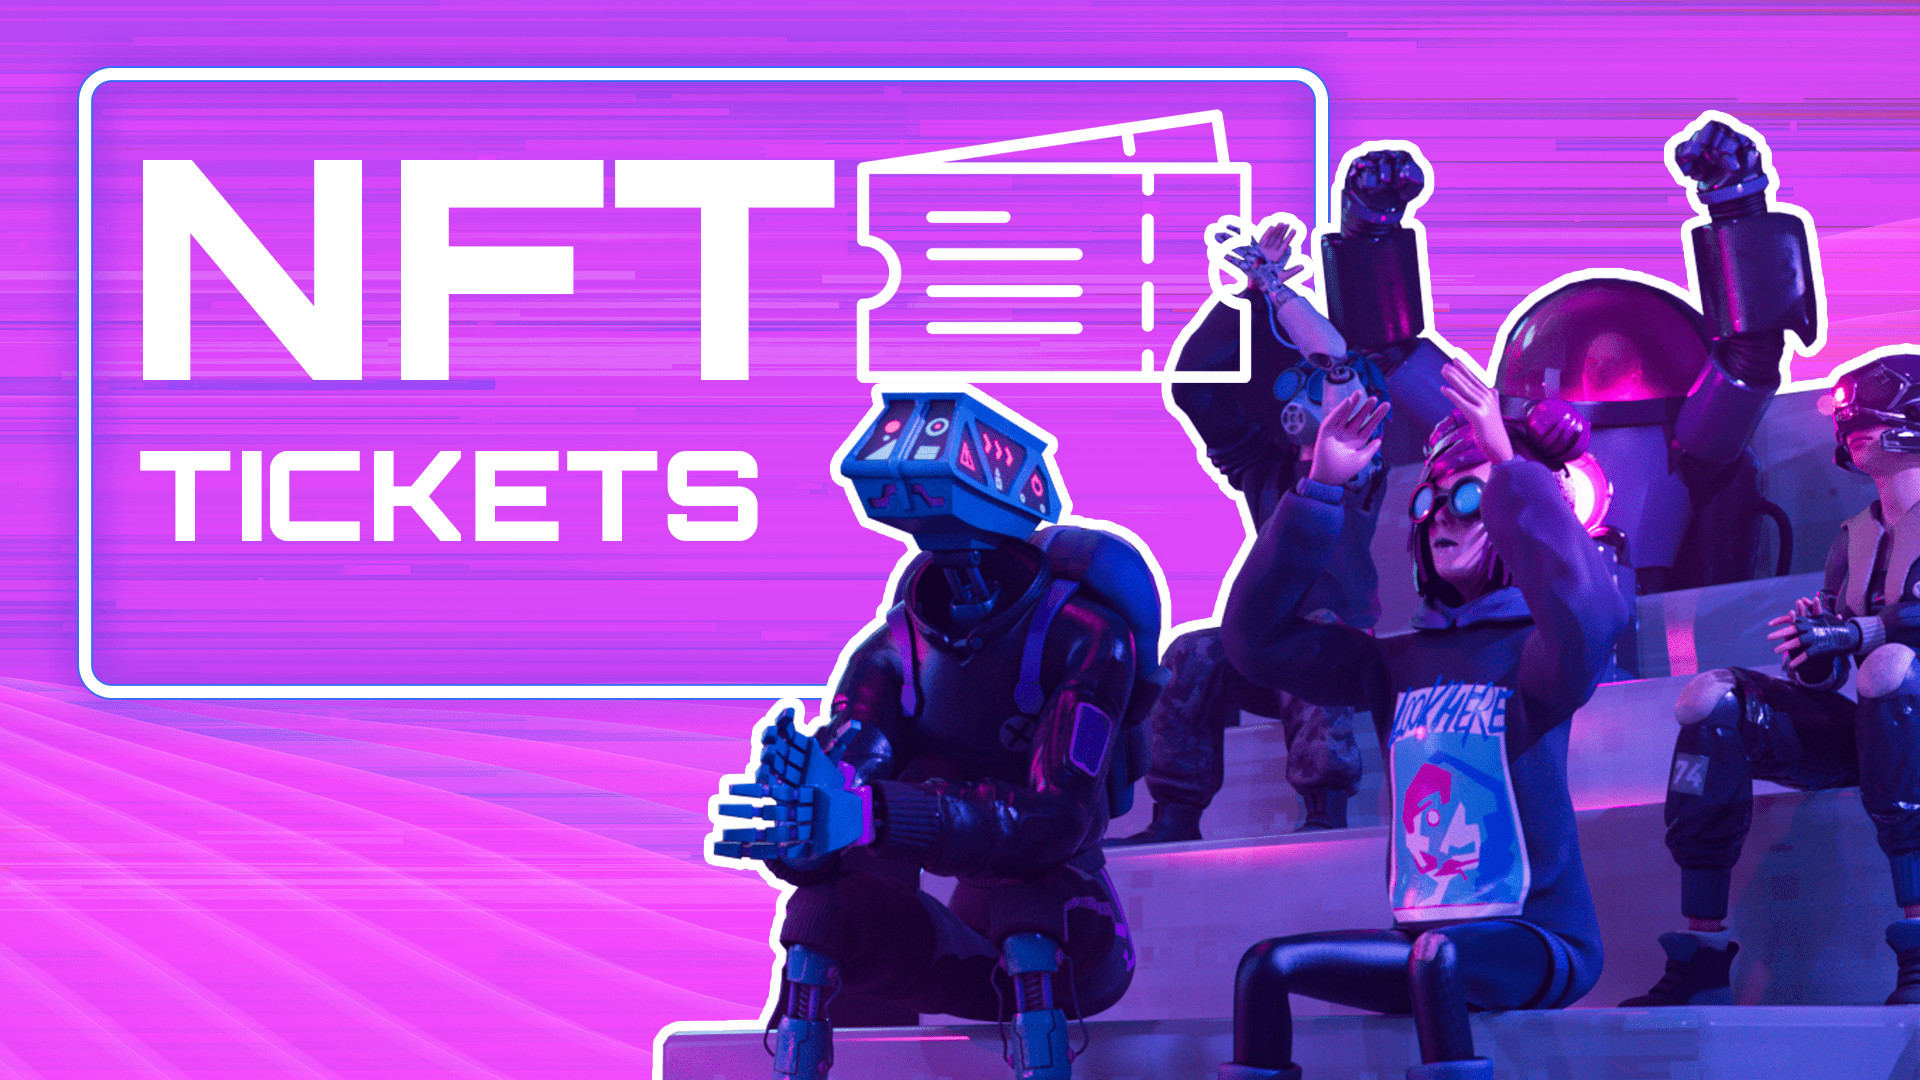 Guide: How to Create NFT Tickets? cover image